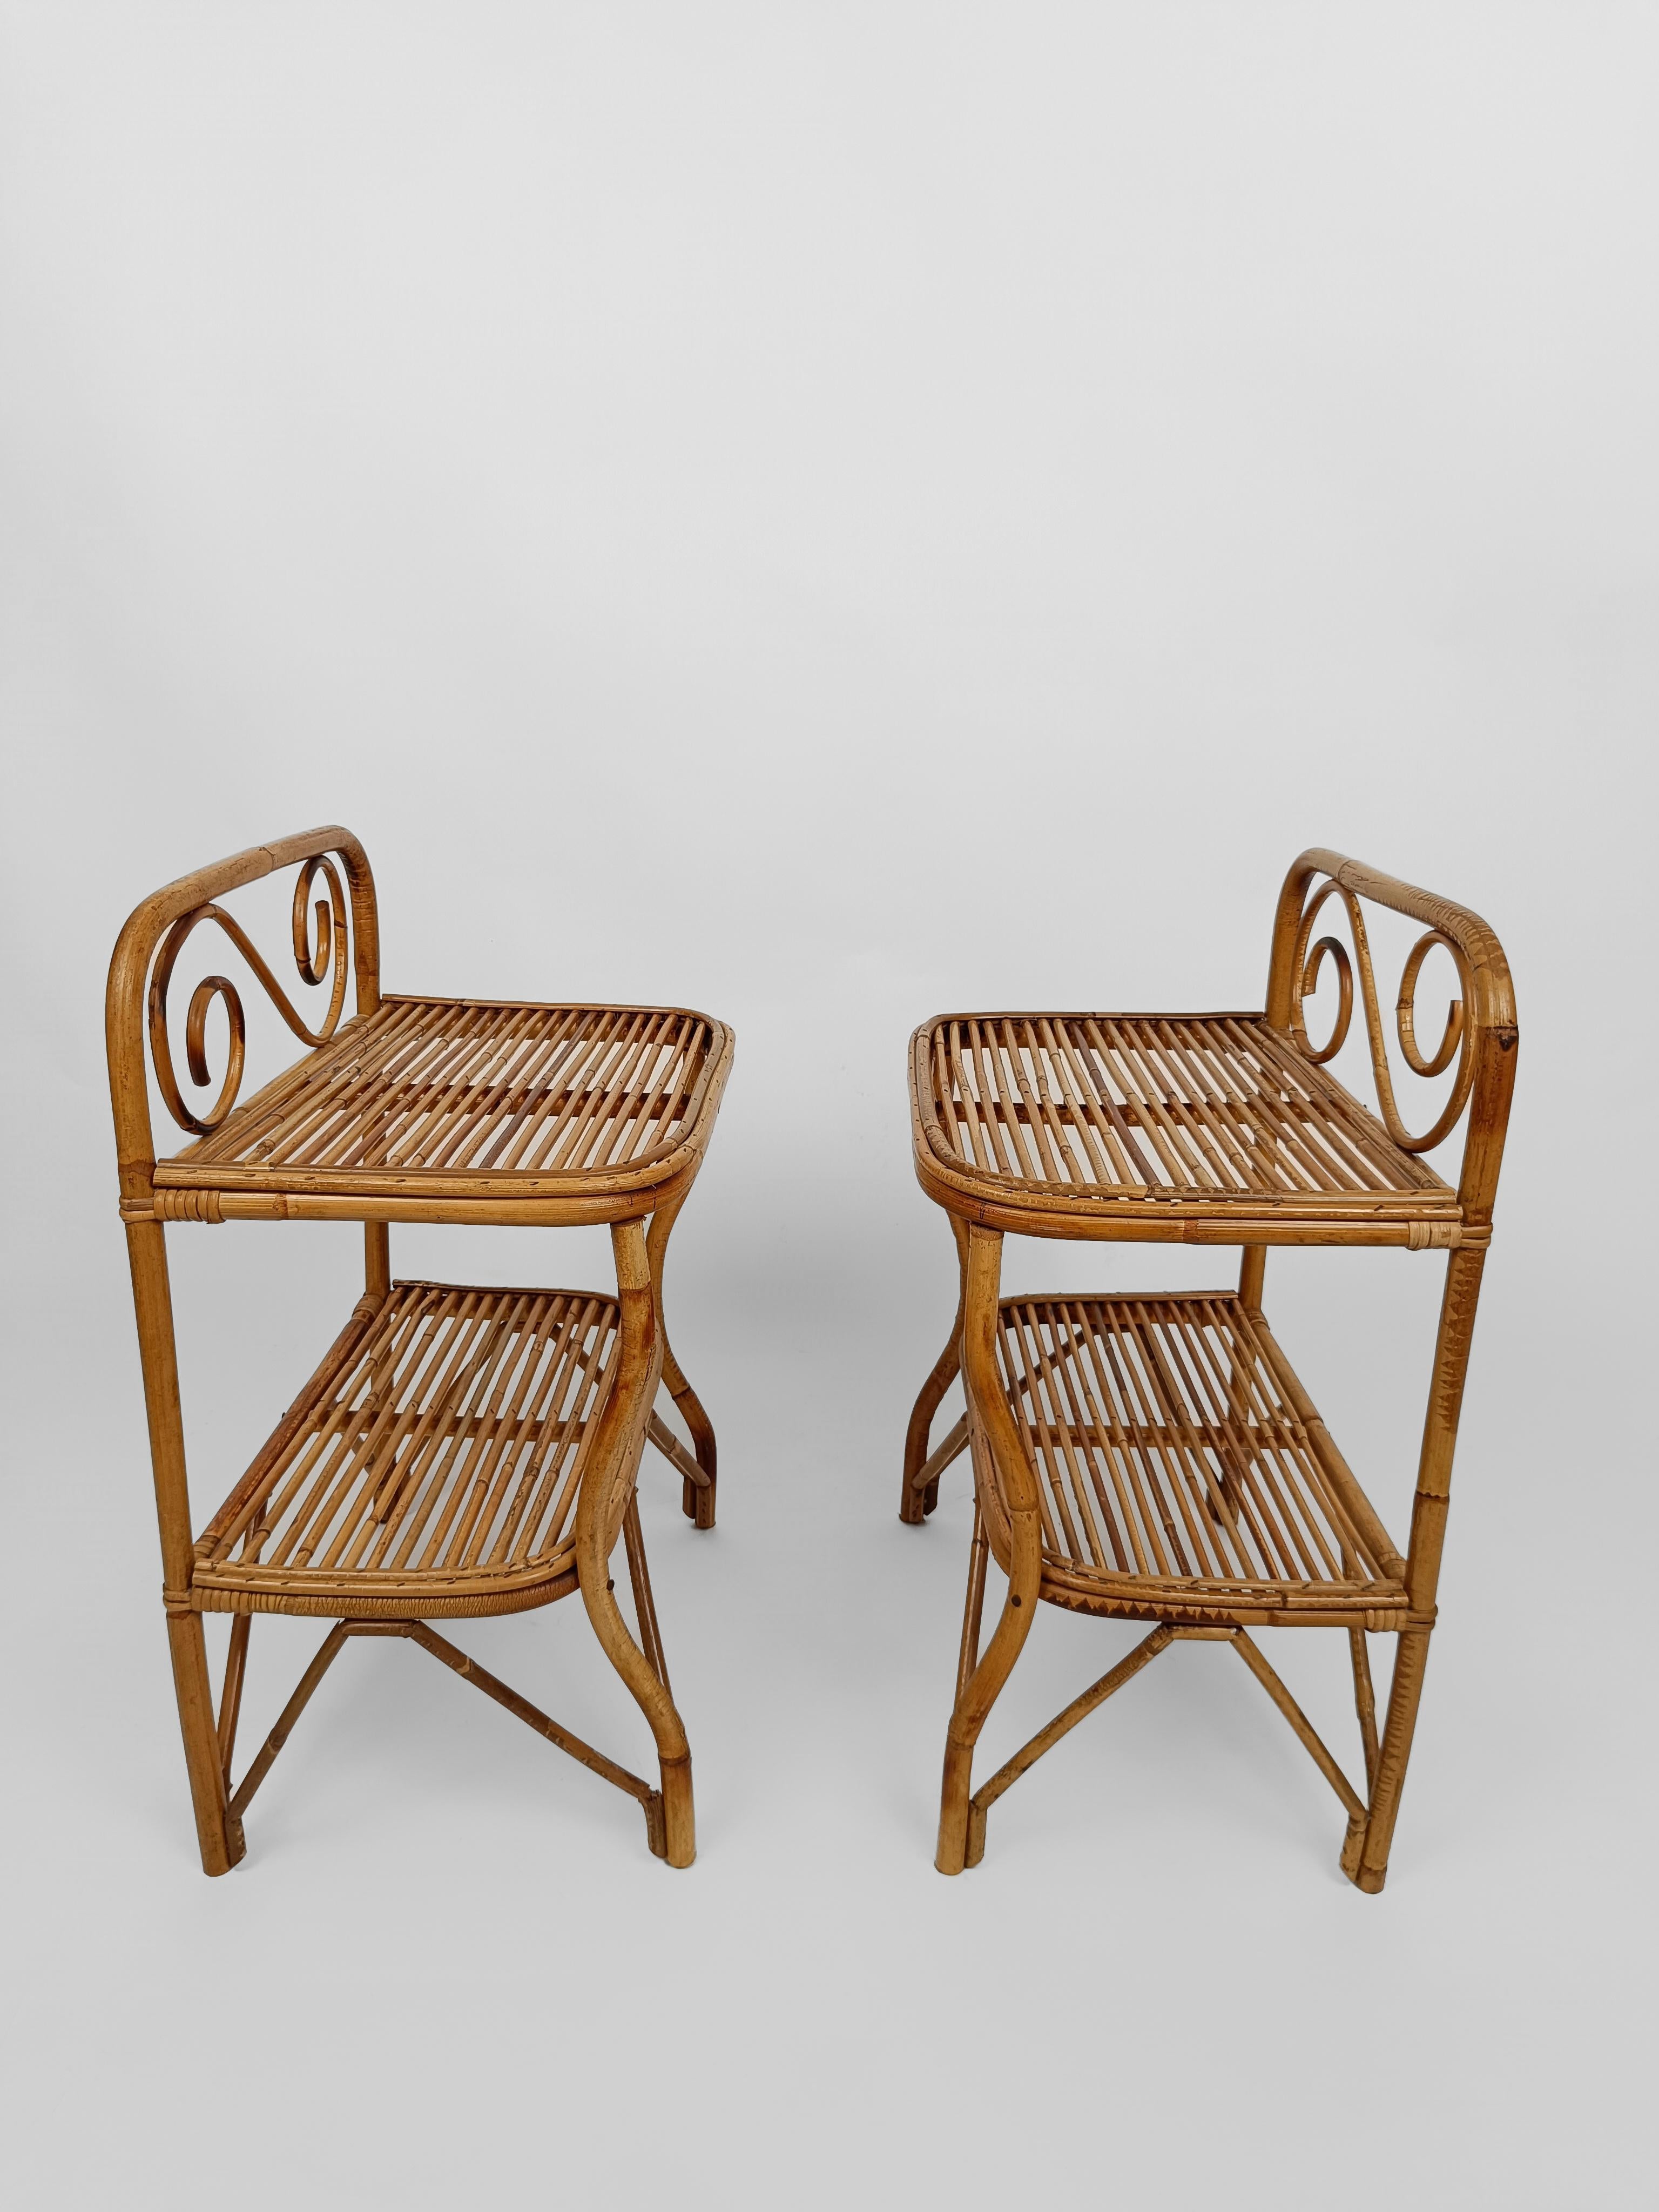 Pair of Italian Bedside Table Nightstands in Bamboo, Rattan and Cane, 1960s  For Sale 3